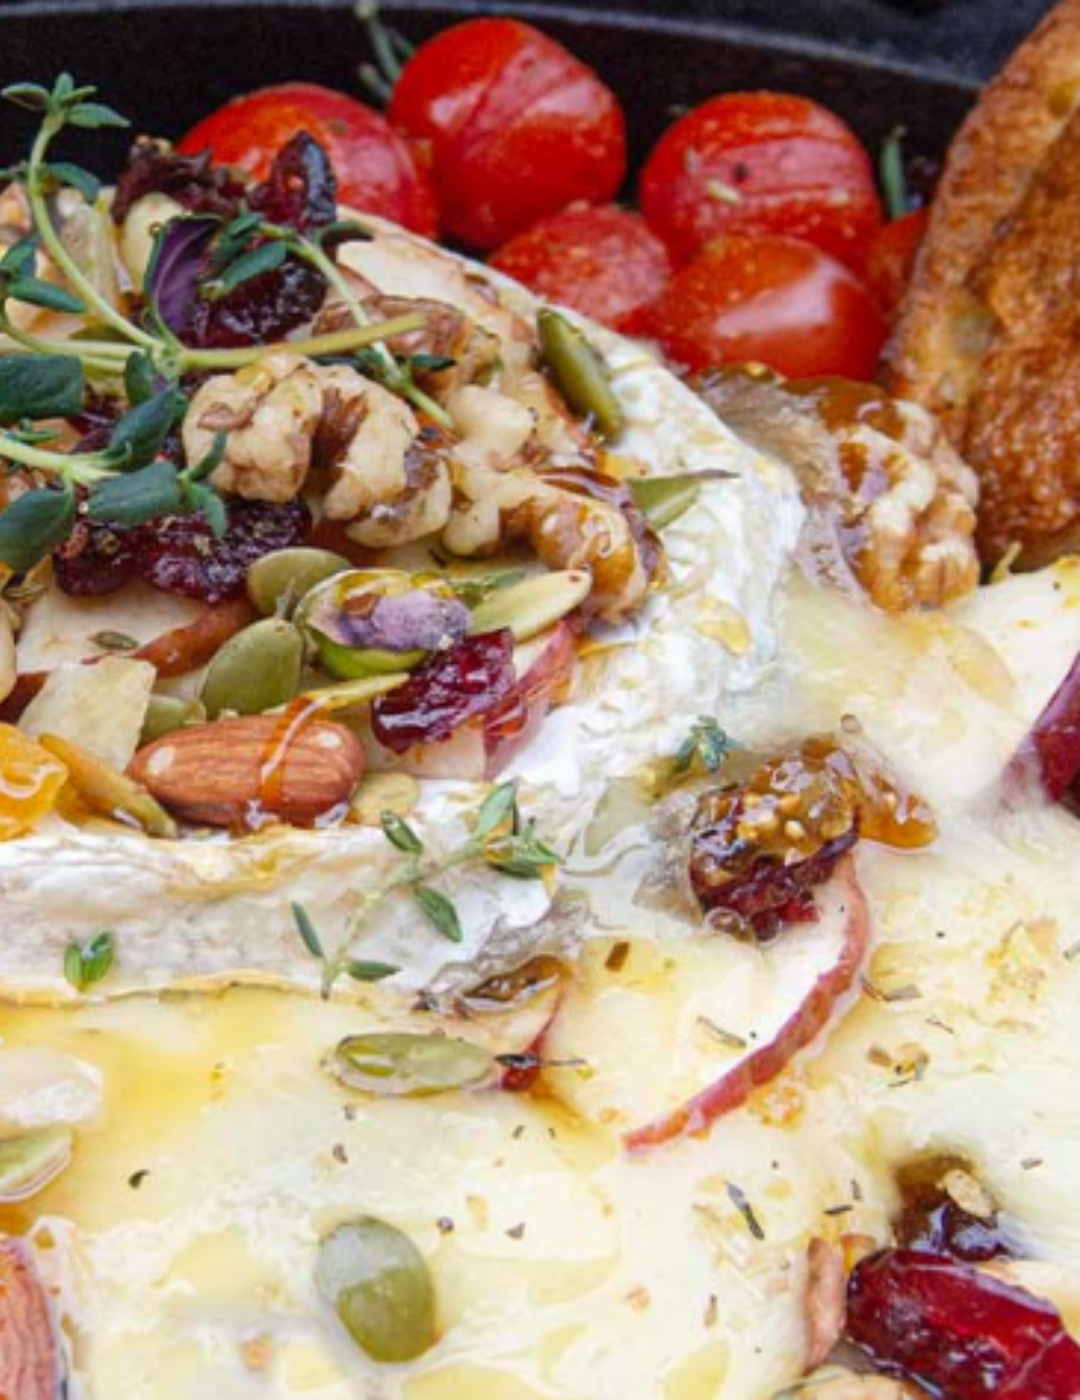 Baked Brie with Herbs, Berries, Nuts and Honey